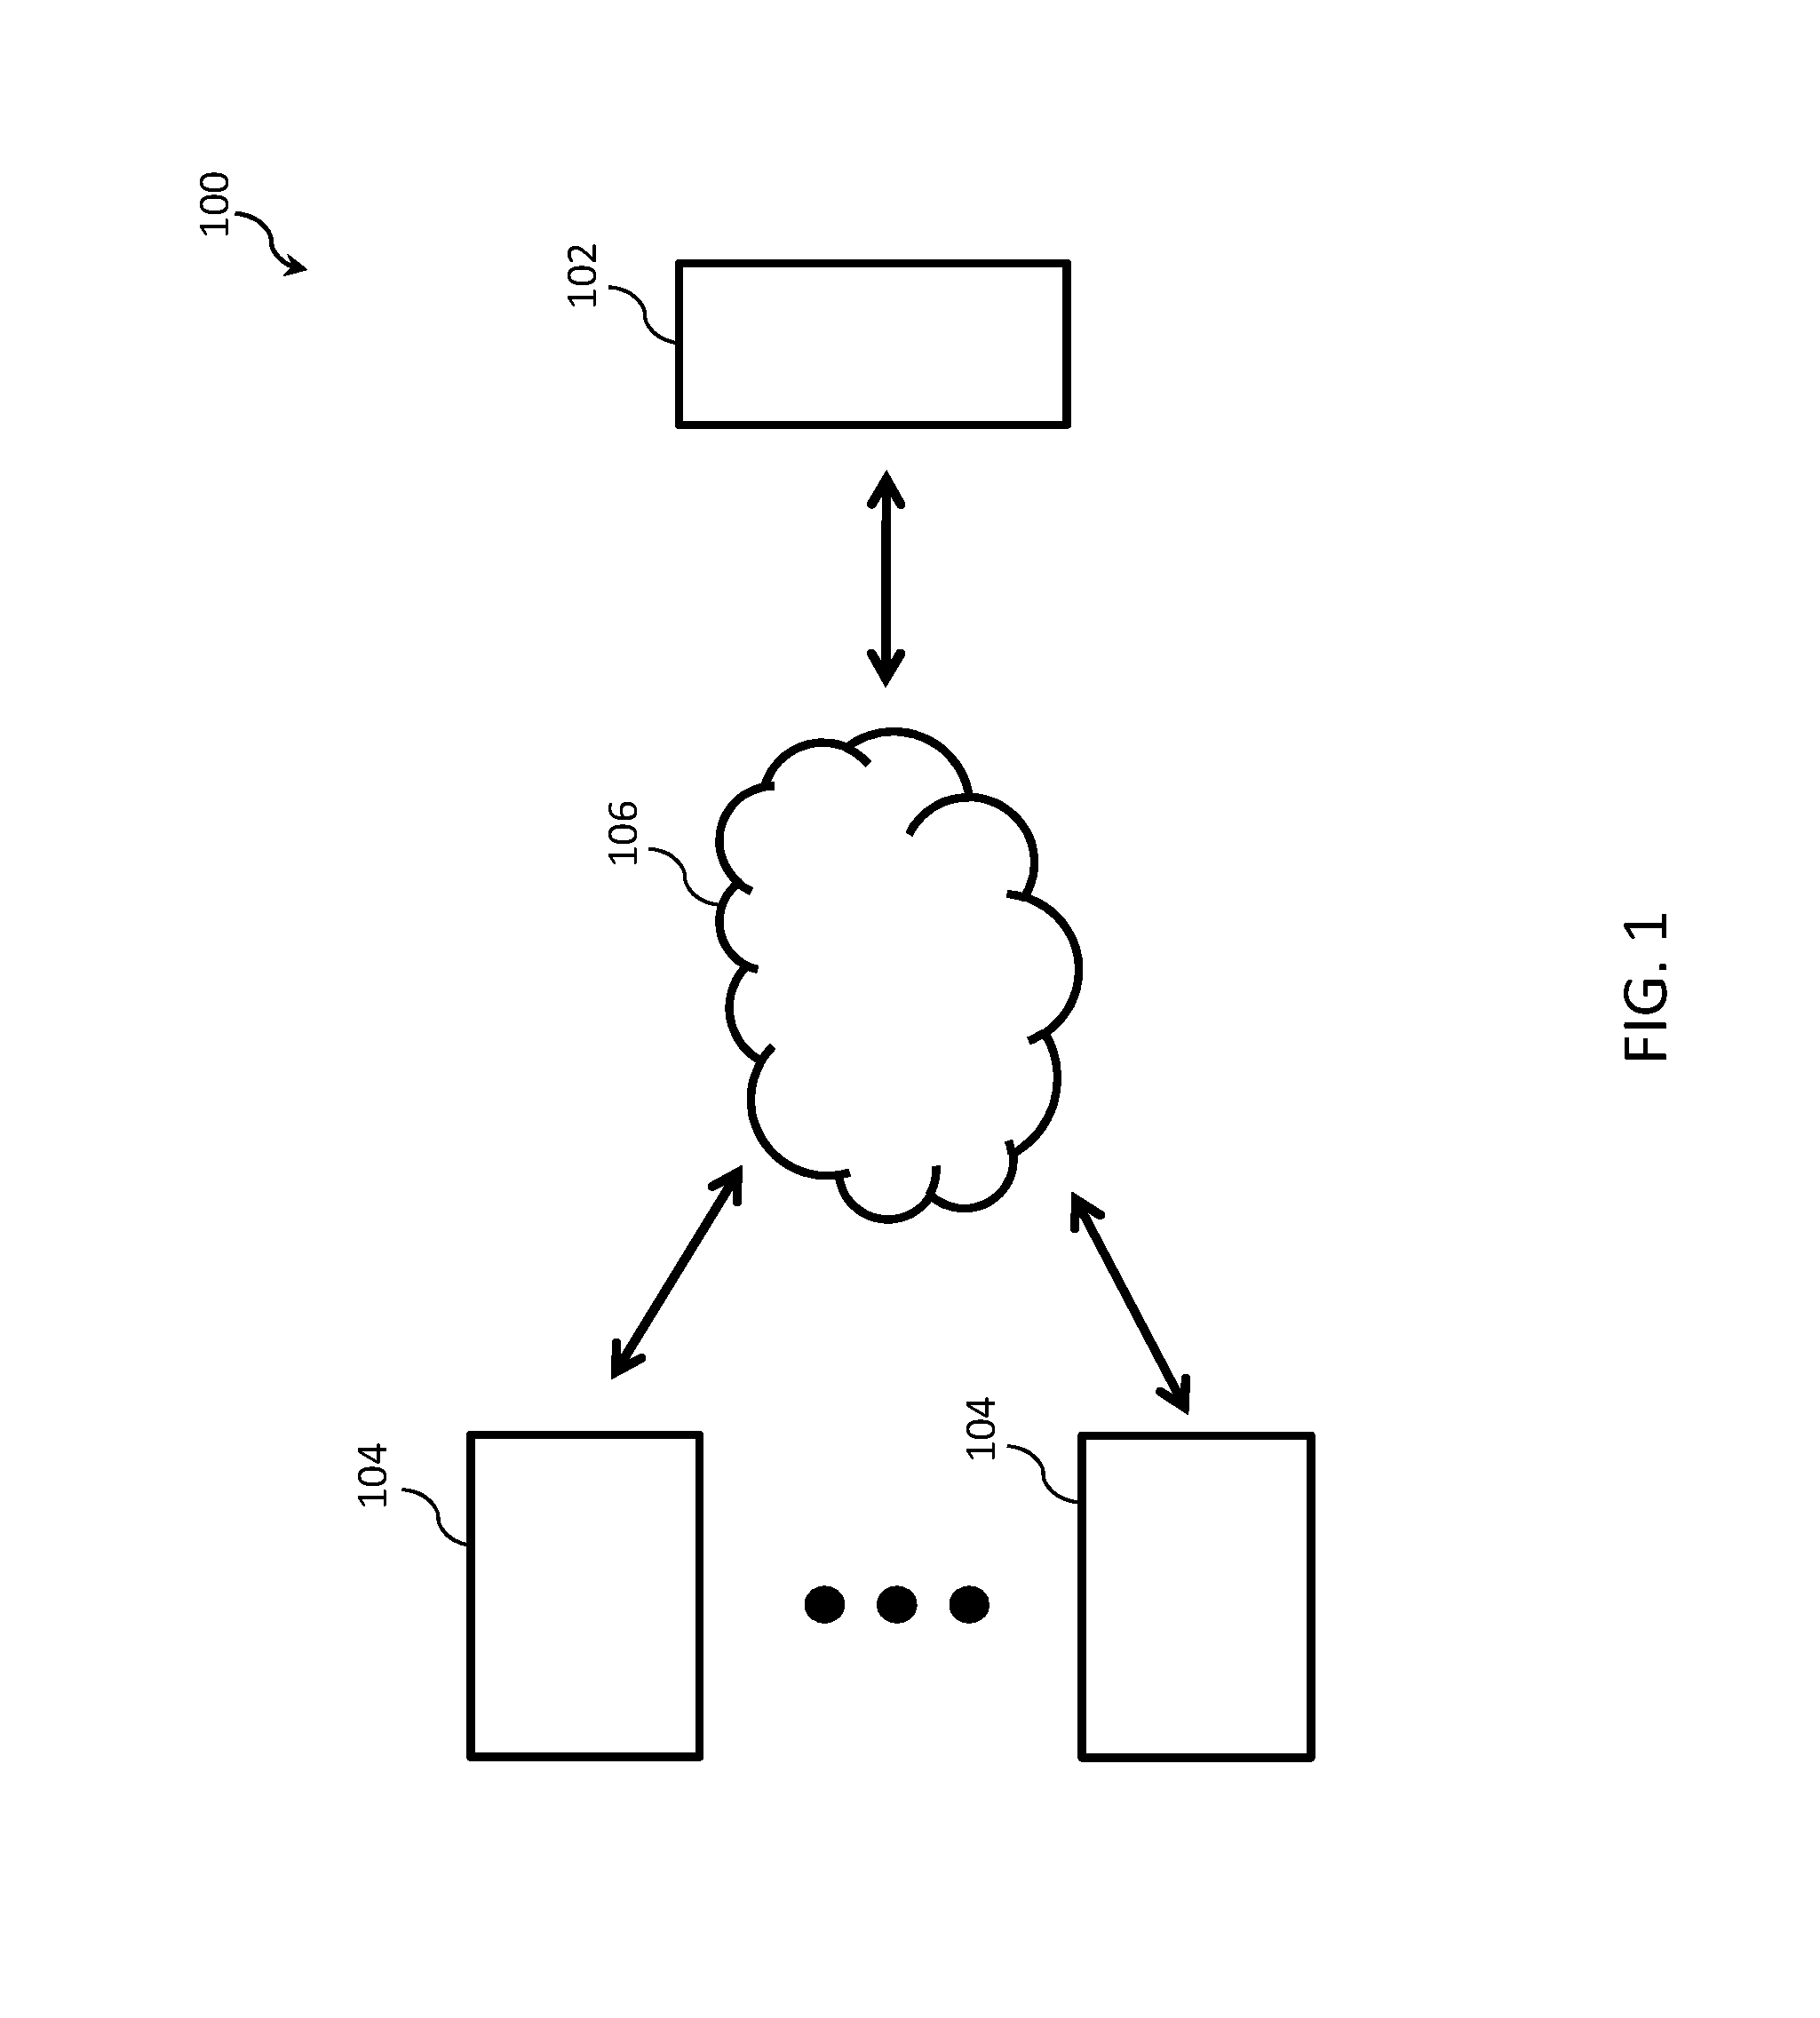 Methods and Electronic Commerce Systems for Updating and Displaying the Price of Goods